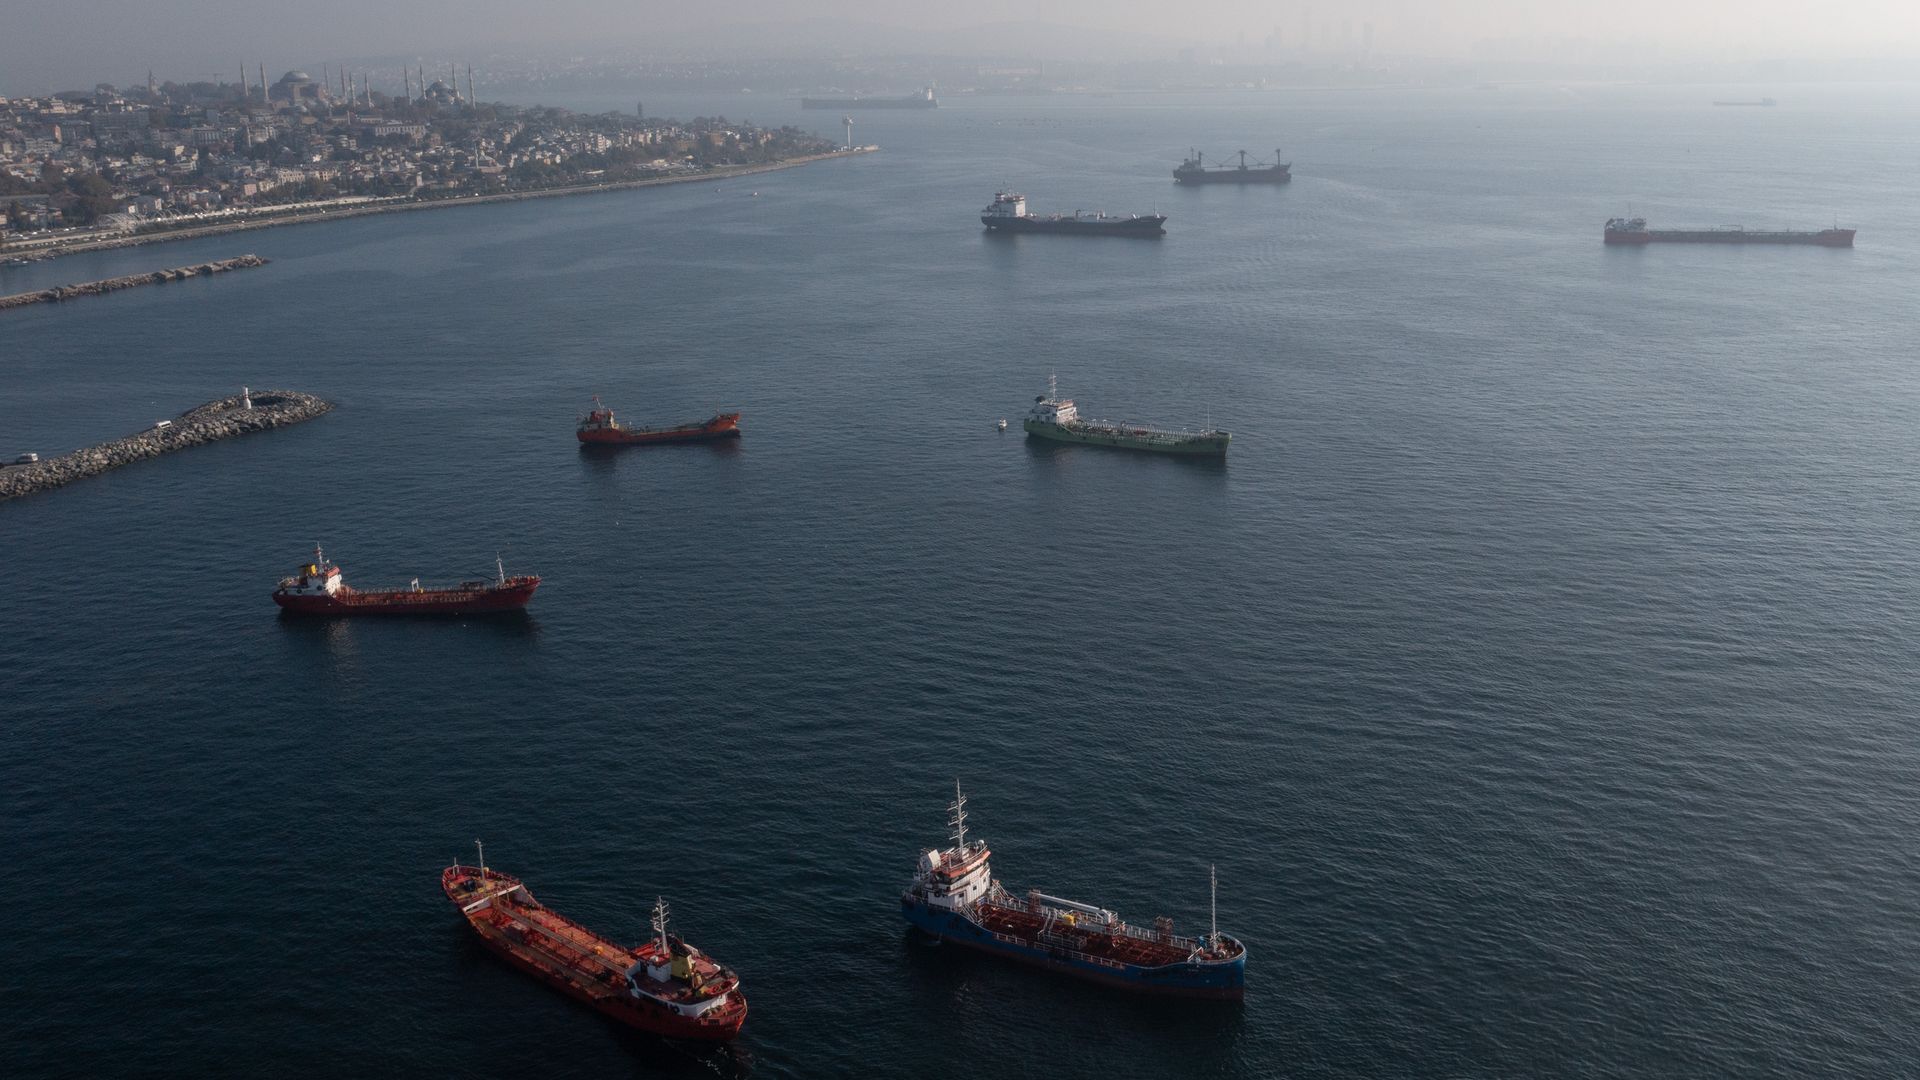 Ships, including those carrying grain from Ukraine and awaiting inspections, are seen anchored off the Istanbul coastline.